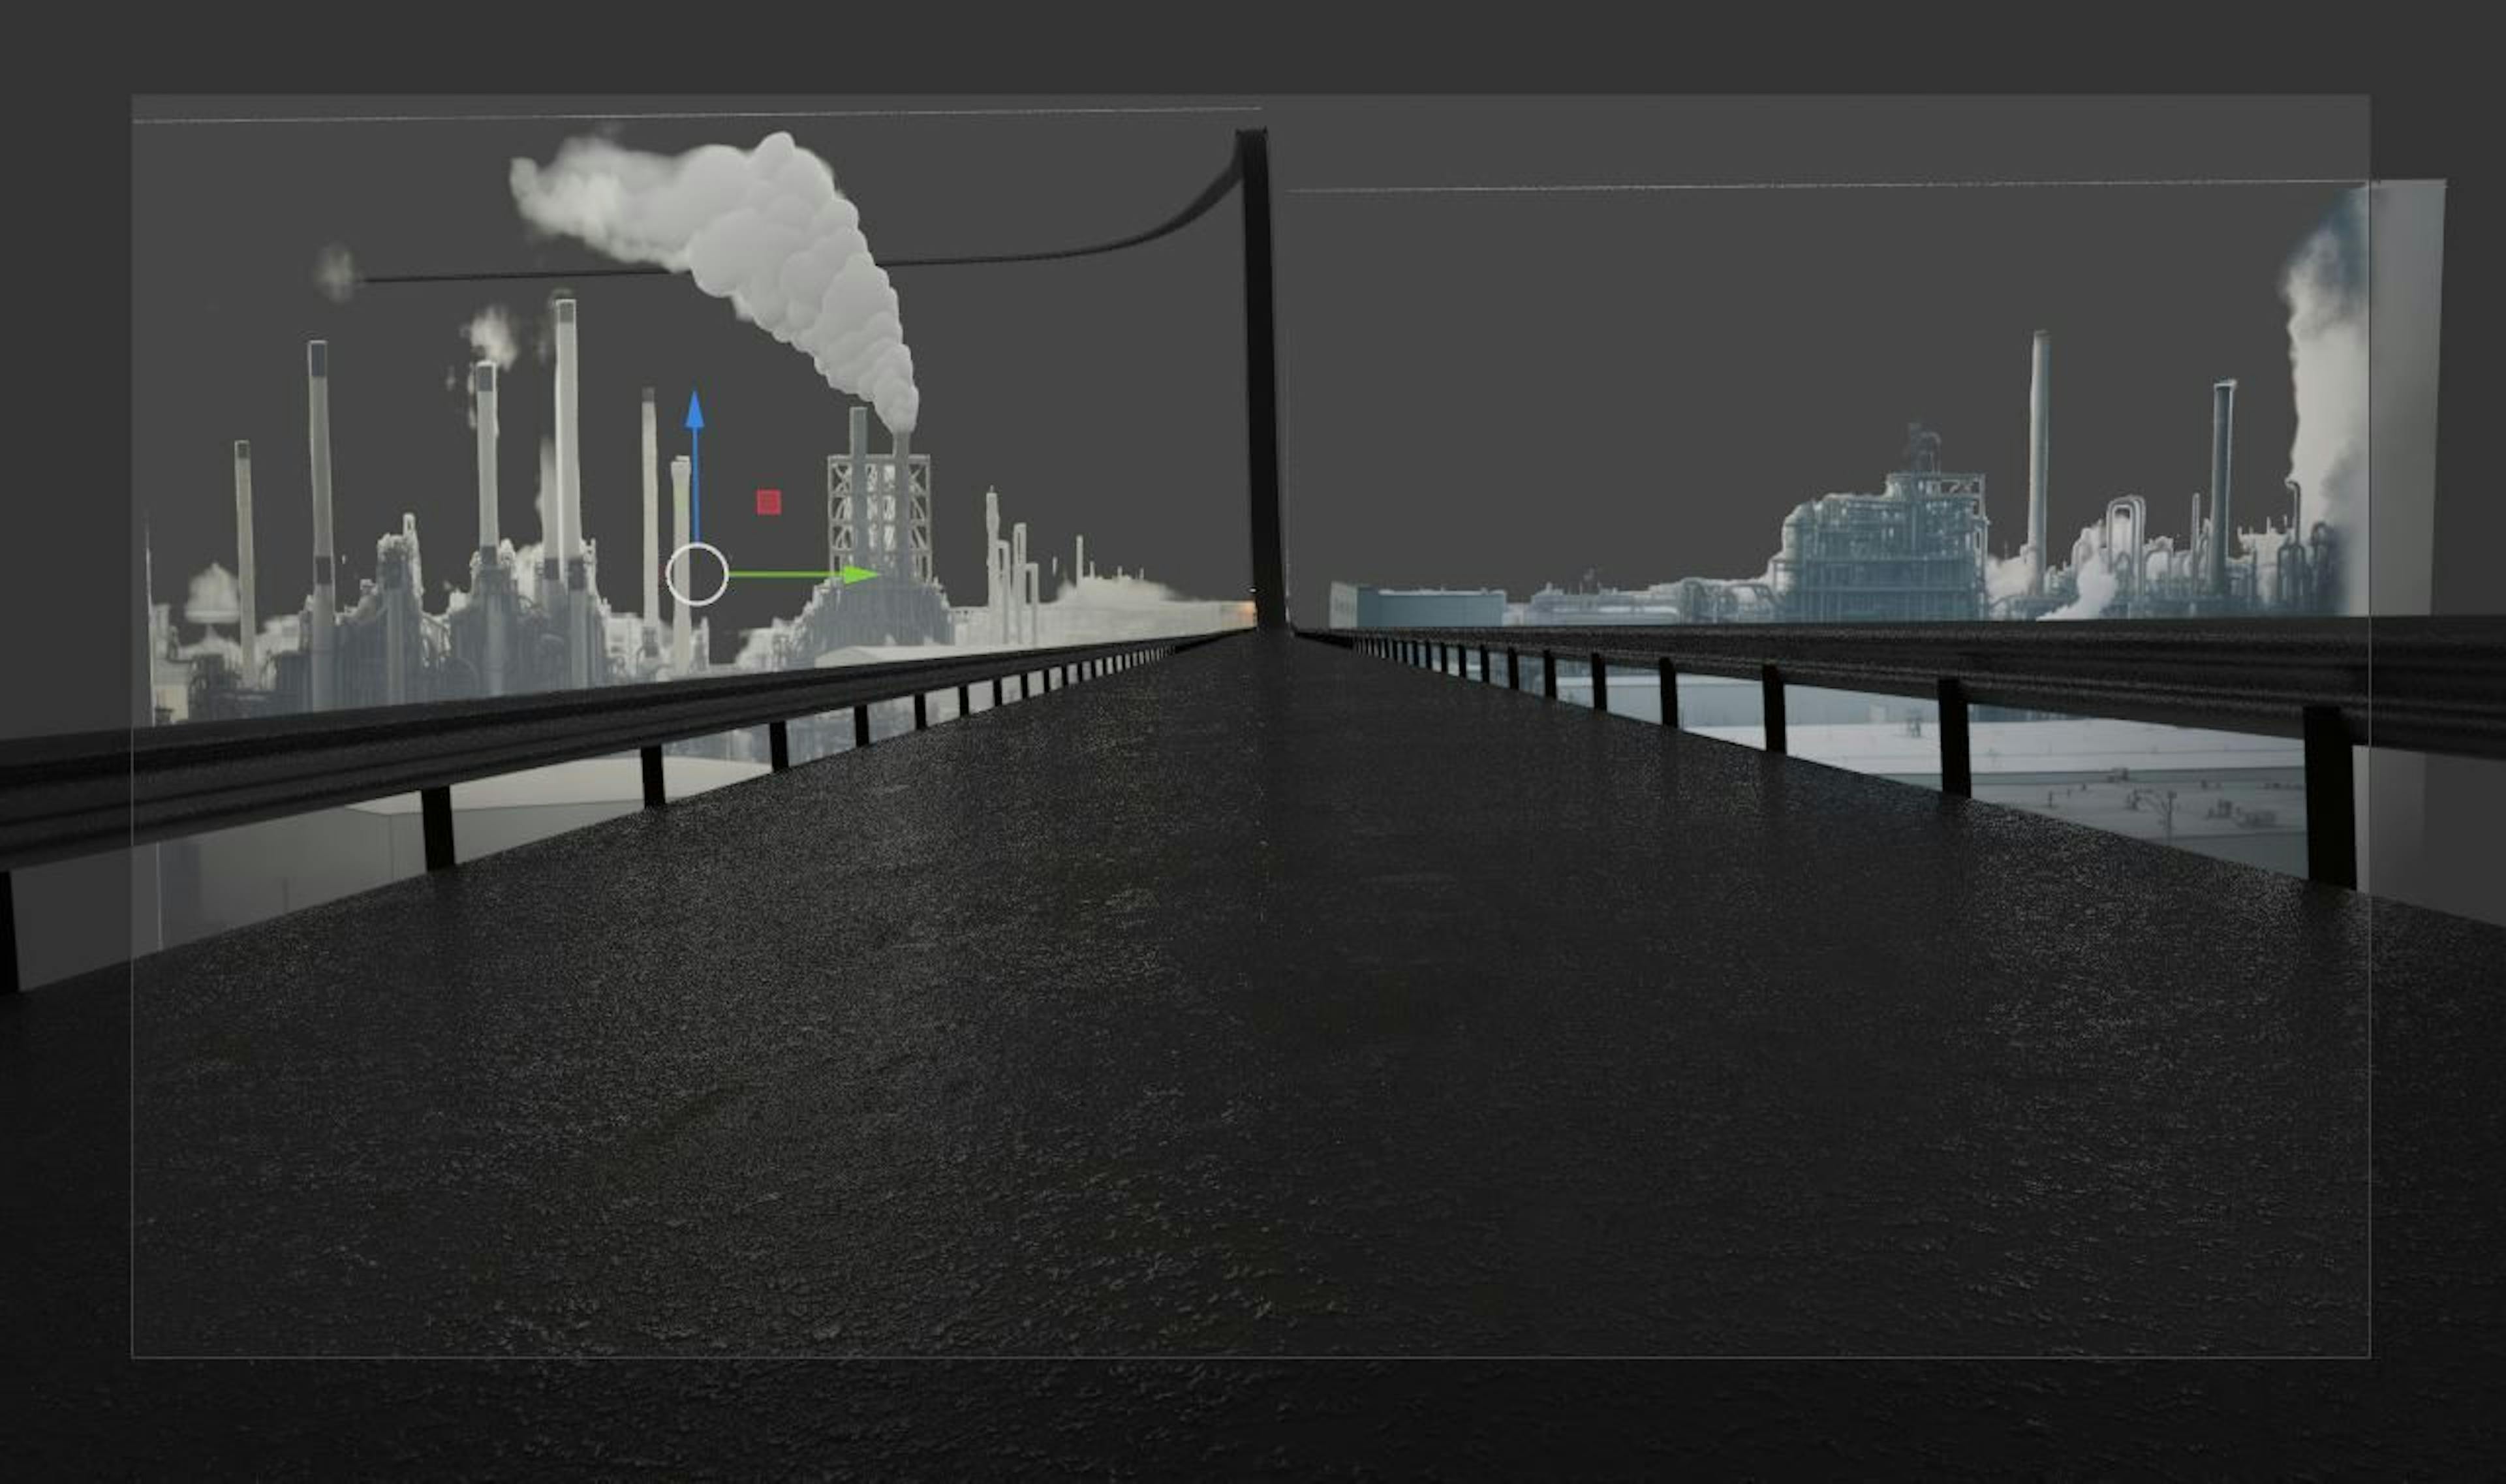 This is a 3D rendering of a scene depicting an industrial landscape as seen from a bridge. The view is head-on, with the bridge leading towards a horizon dominated by factories and smokestacks emitting plumes of smoke. The environment is rendered in grayscale, giving it a stark, dystopian appearance. The textures are detailed, with a reflective road surface suggesting a wet or polished finish. The image is overlaid with some 3D design interface elements, such as colored arrows and lines, indicating a work-in-progress stage of a digital design project.